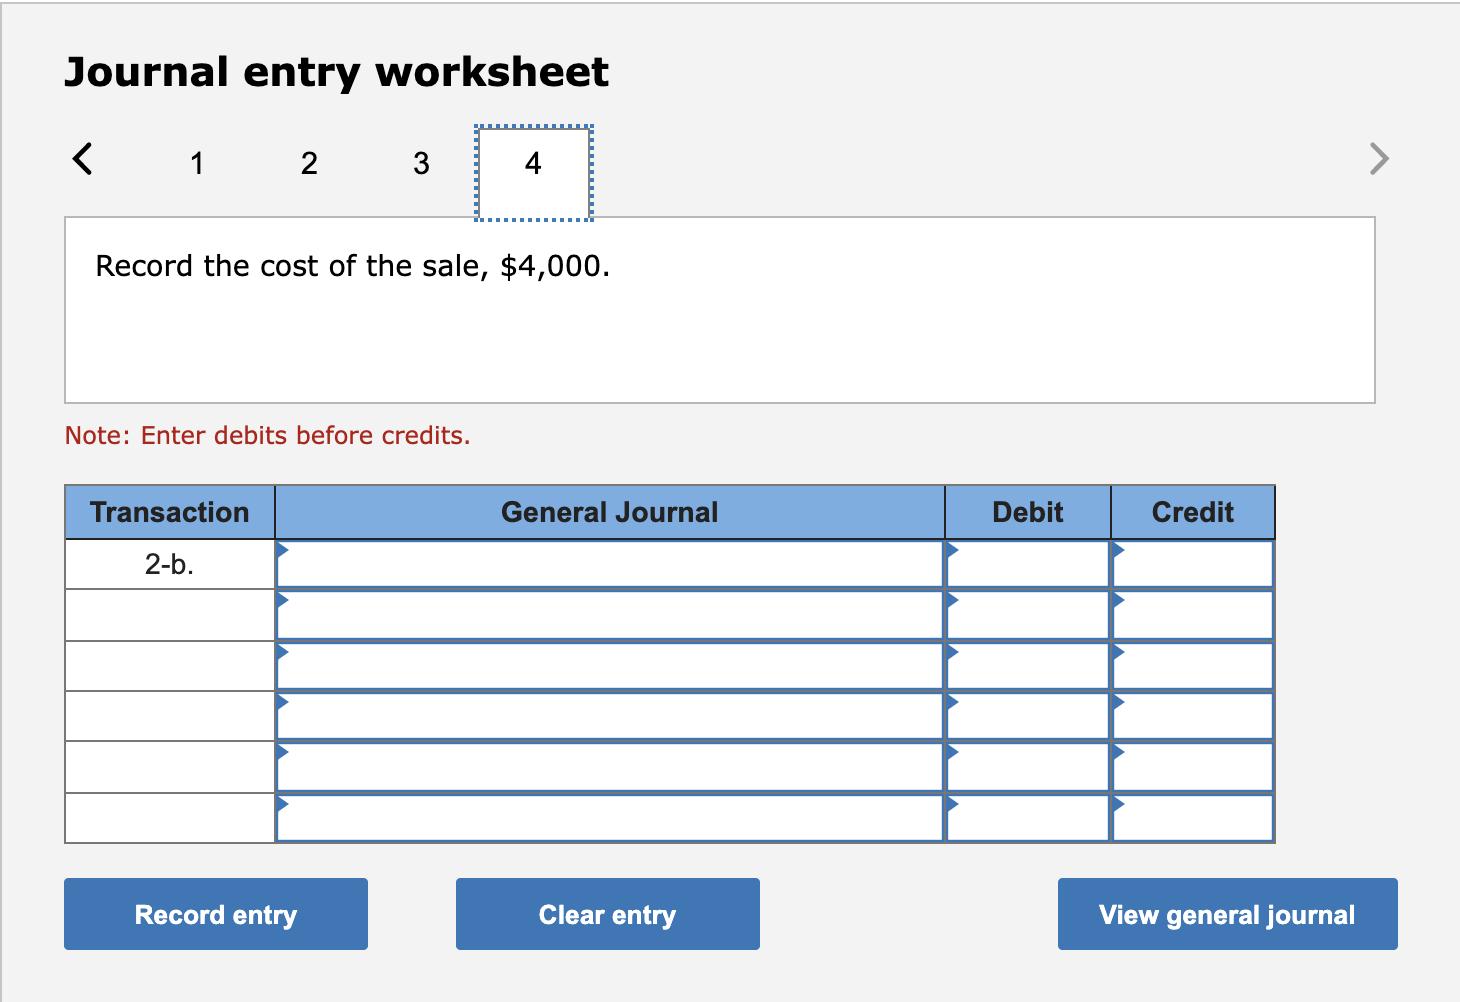 Journal entry worksheet< 12 34 Record the cost of the sale, $4,000. Note: Enter debits before credits. Transaction General